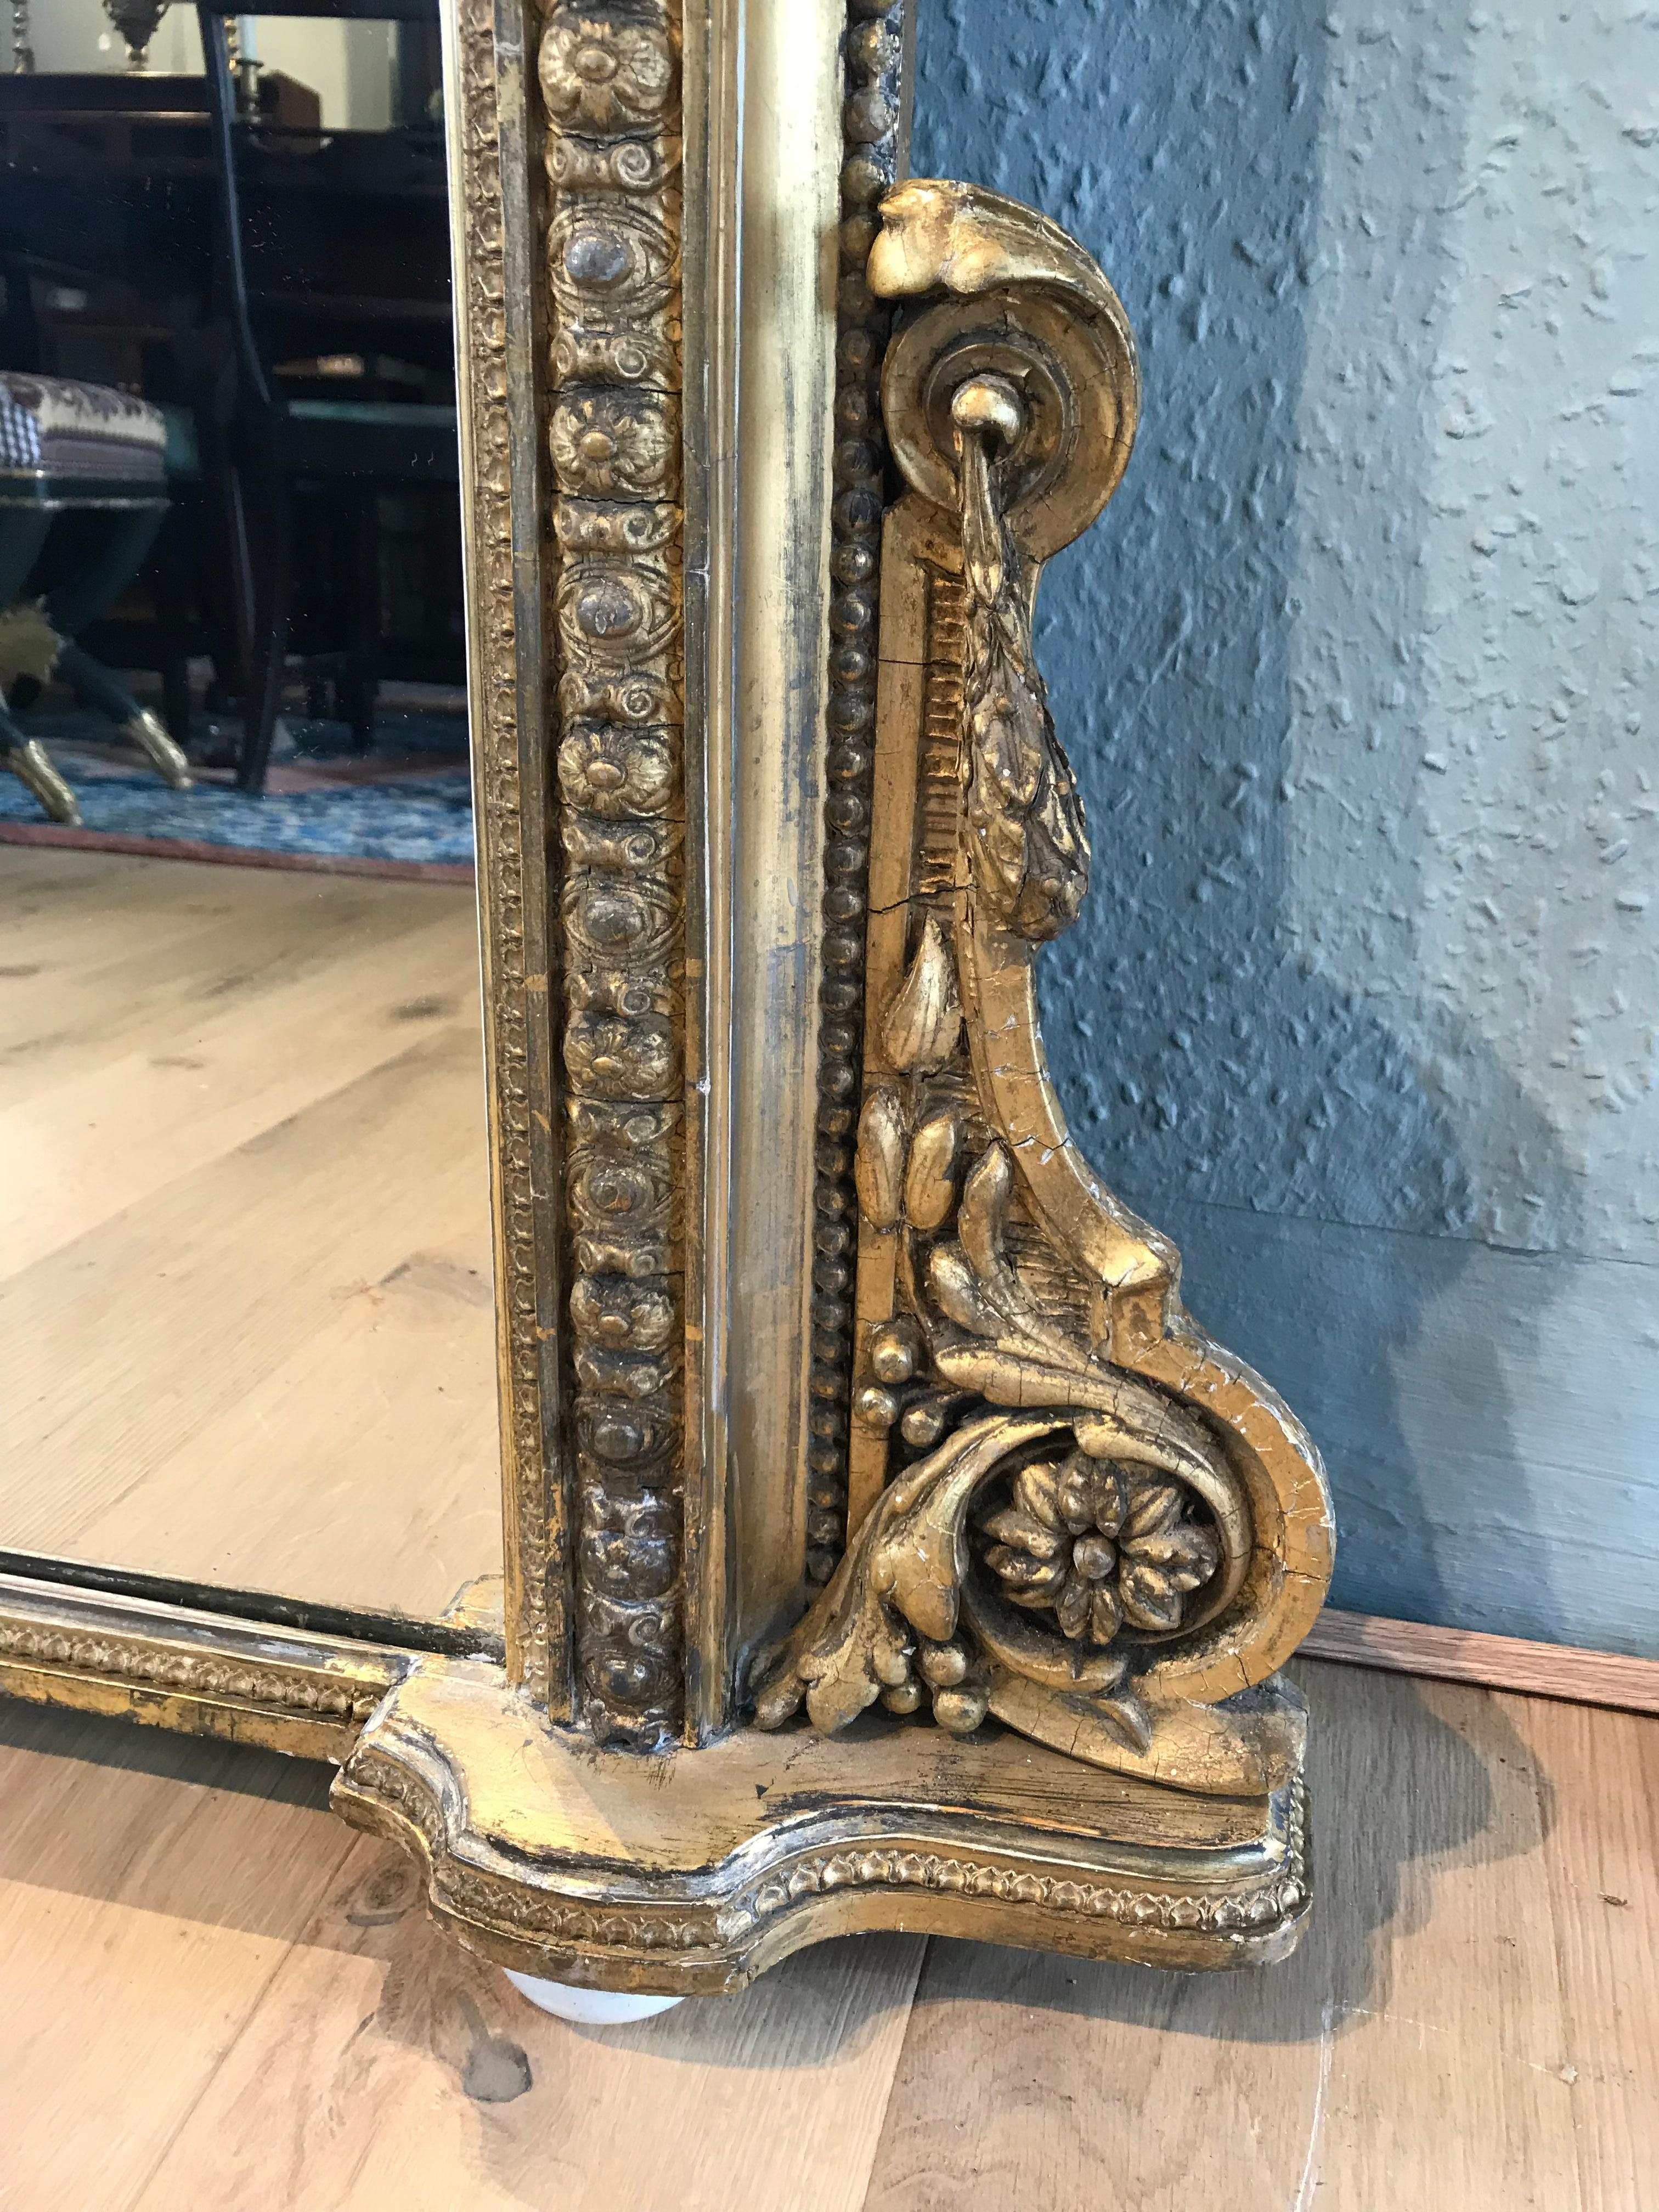 An Impressive 19th-century gilt arched top overmantel mirror set on porcelain bun feet. This stunning overmantel is in very good condition, with beautifully detailed worn through gilding. The mirror has an ornate moulded flower and scroll inner